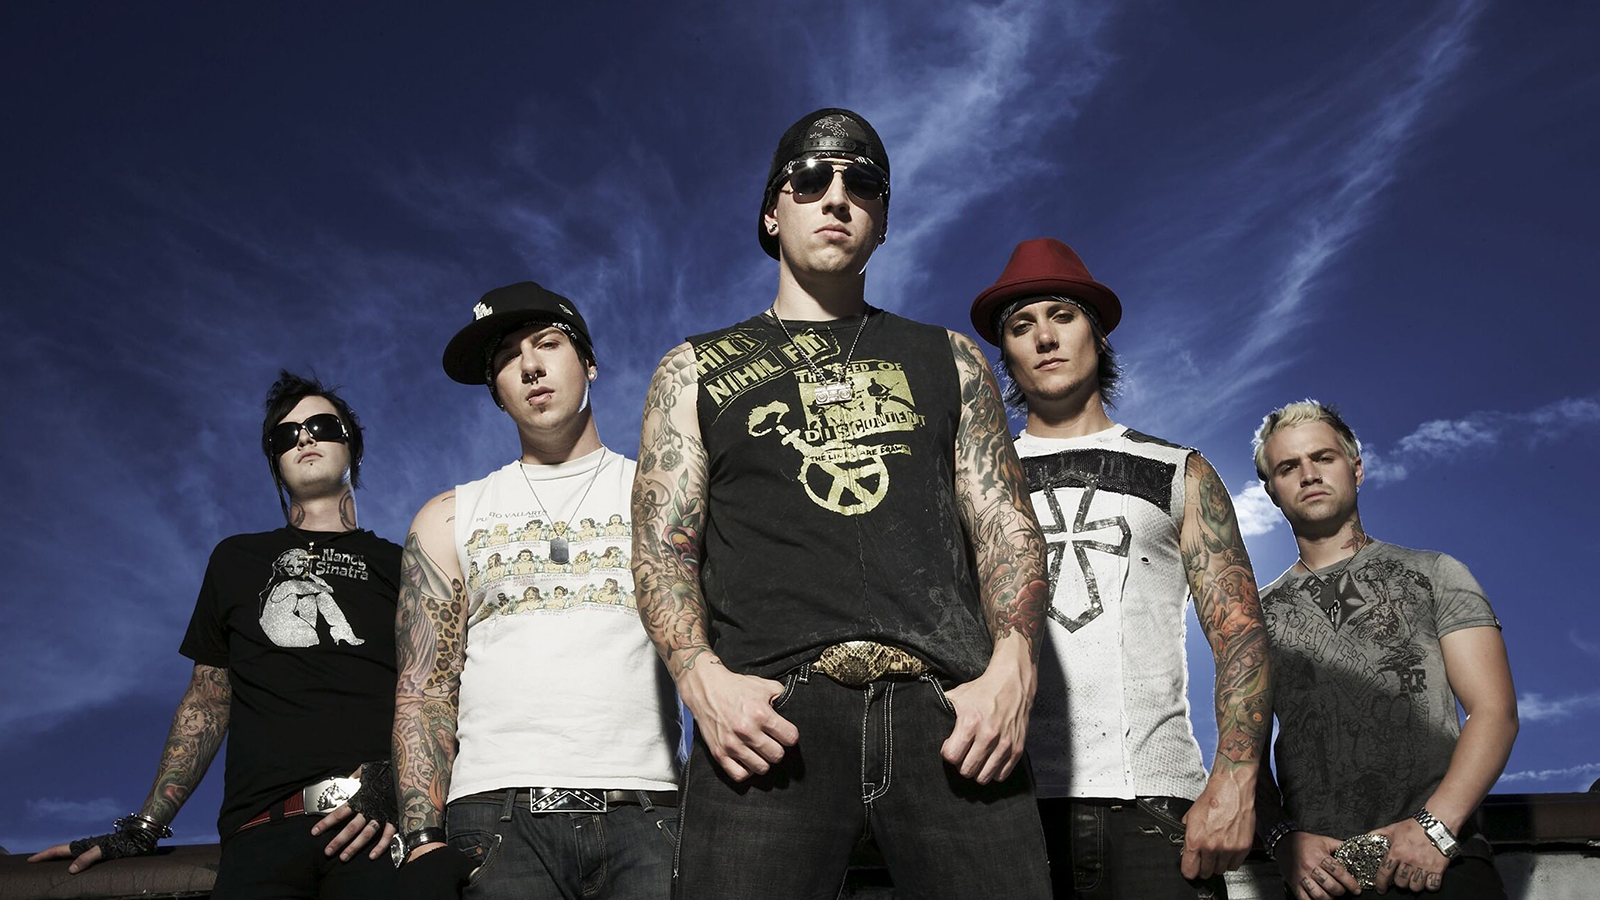 The 10 greatest Avenged Sevenfold riffs ever